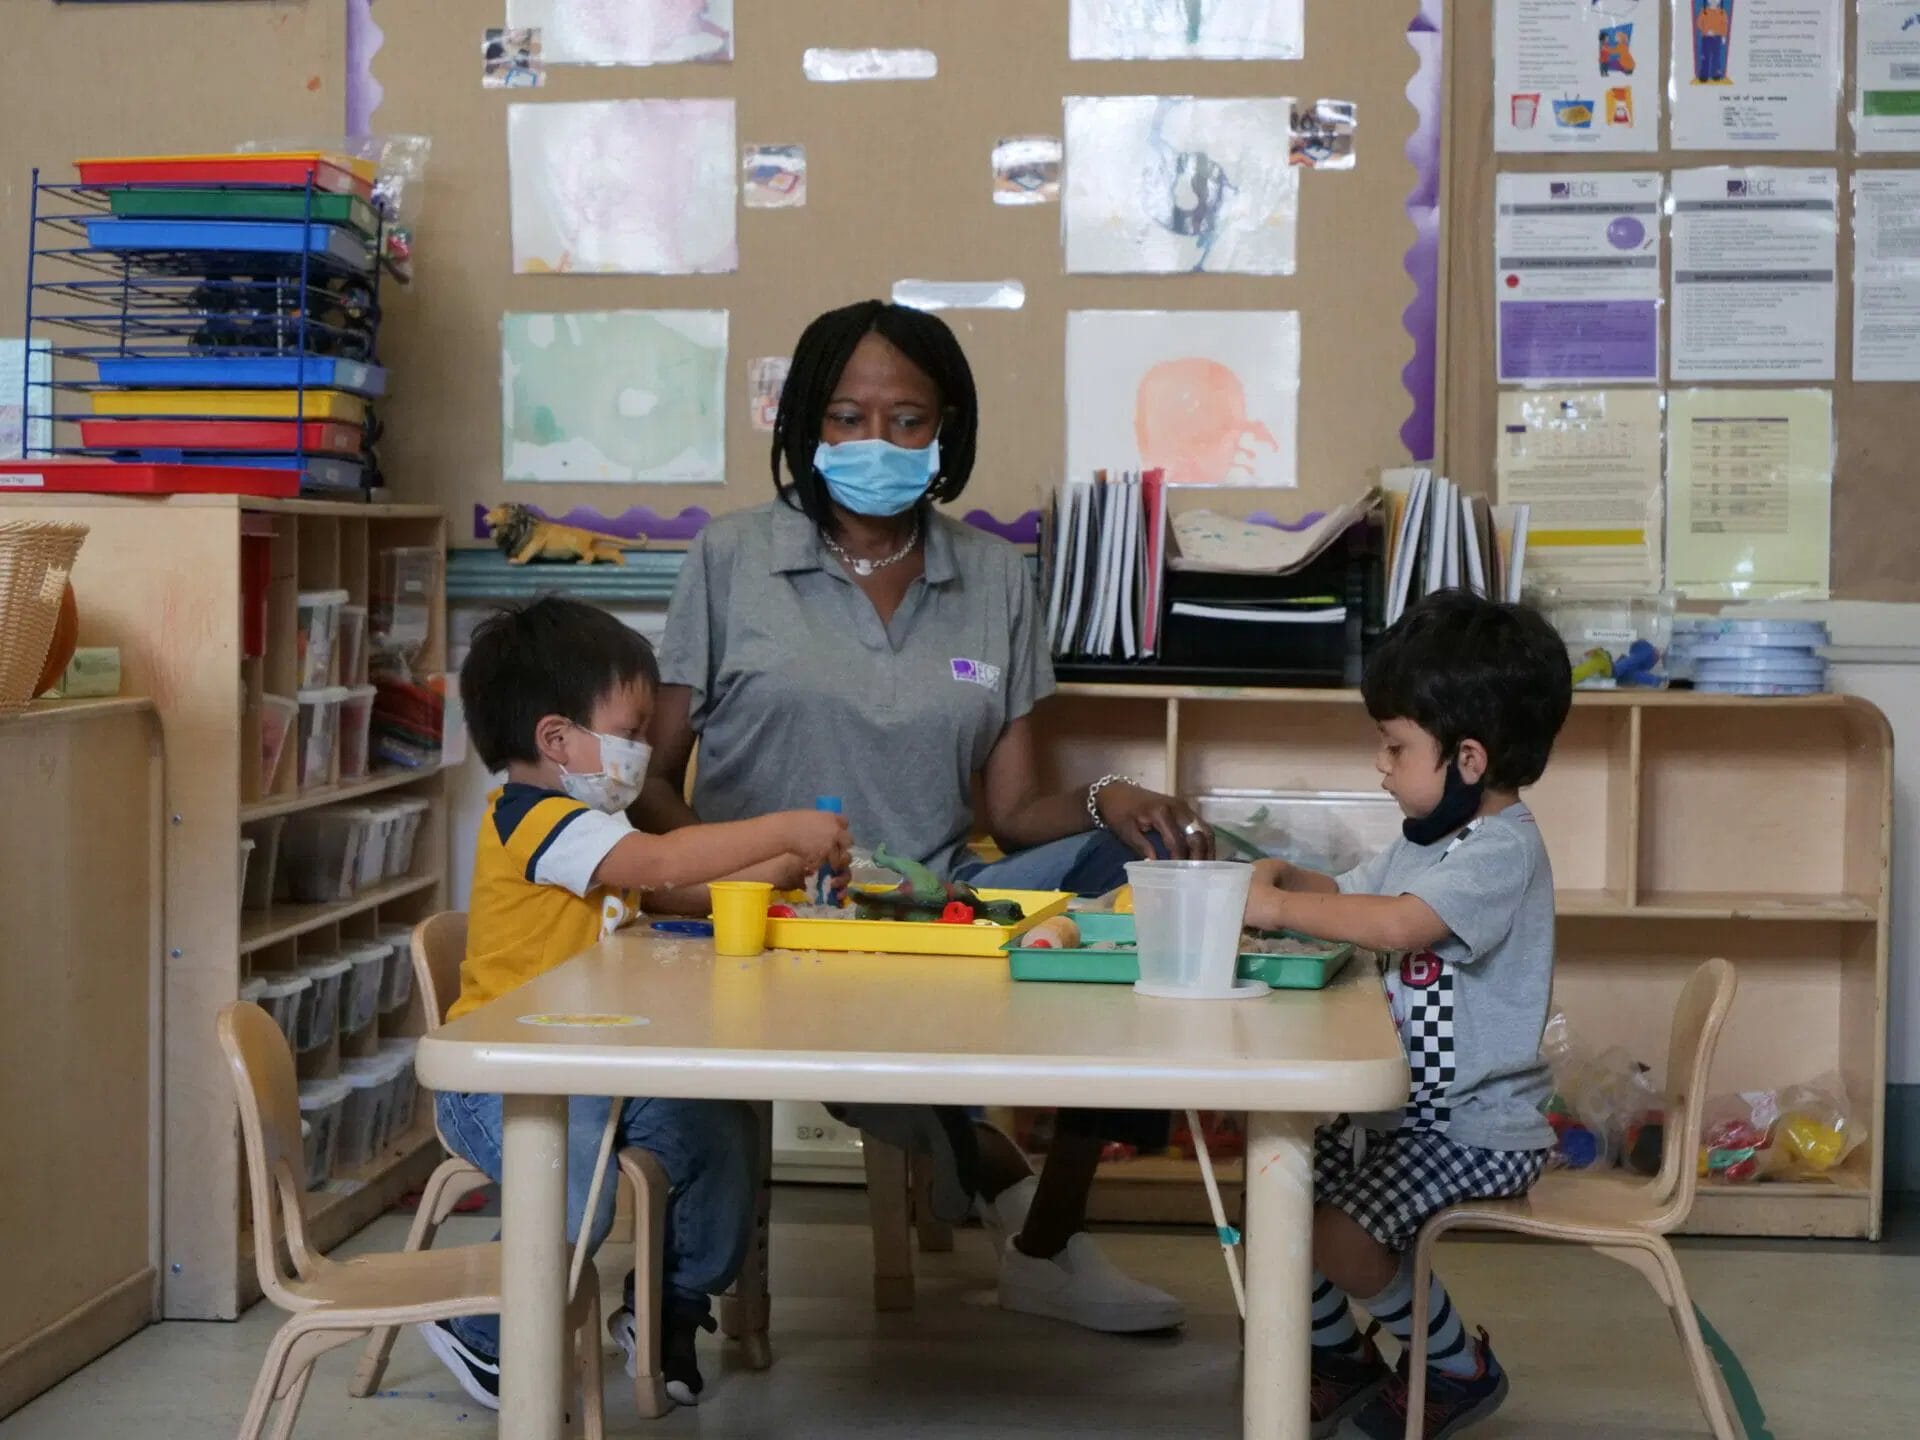 A Black early educator wearing a surgical mask sits with two young children playing with dinosaur toys and sand at a children's table in a classroom.